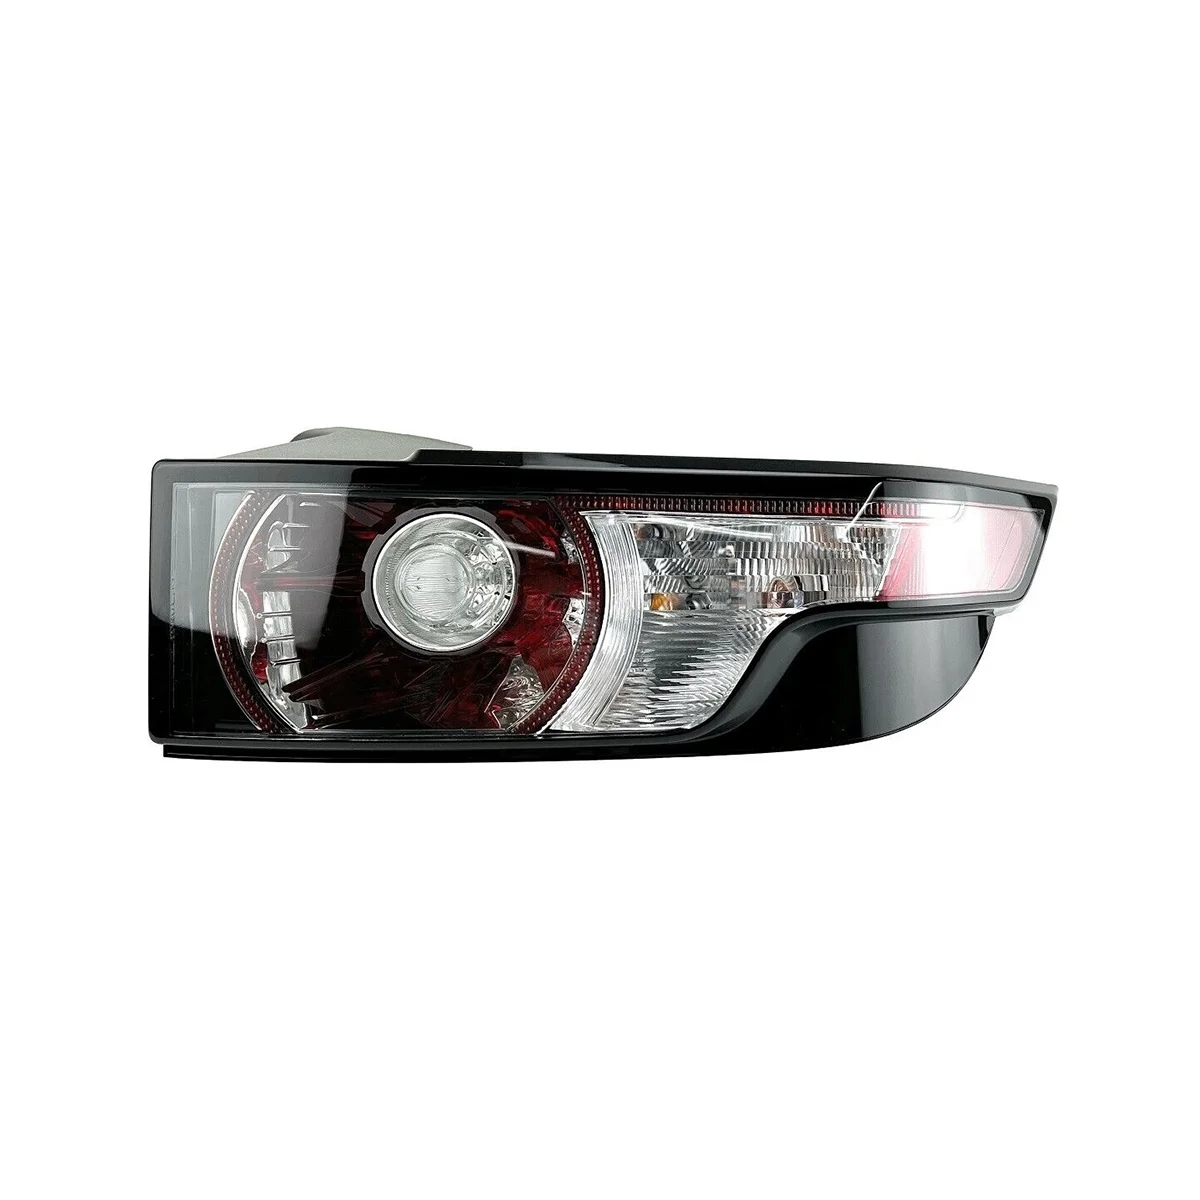 

LR074796 Right Taillight Light LED Tail Lamp Assembly Rear Turn Signal Lamp for Land Rover Range Rover Evoque 2012-2015